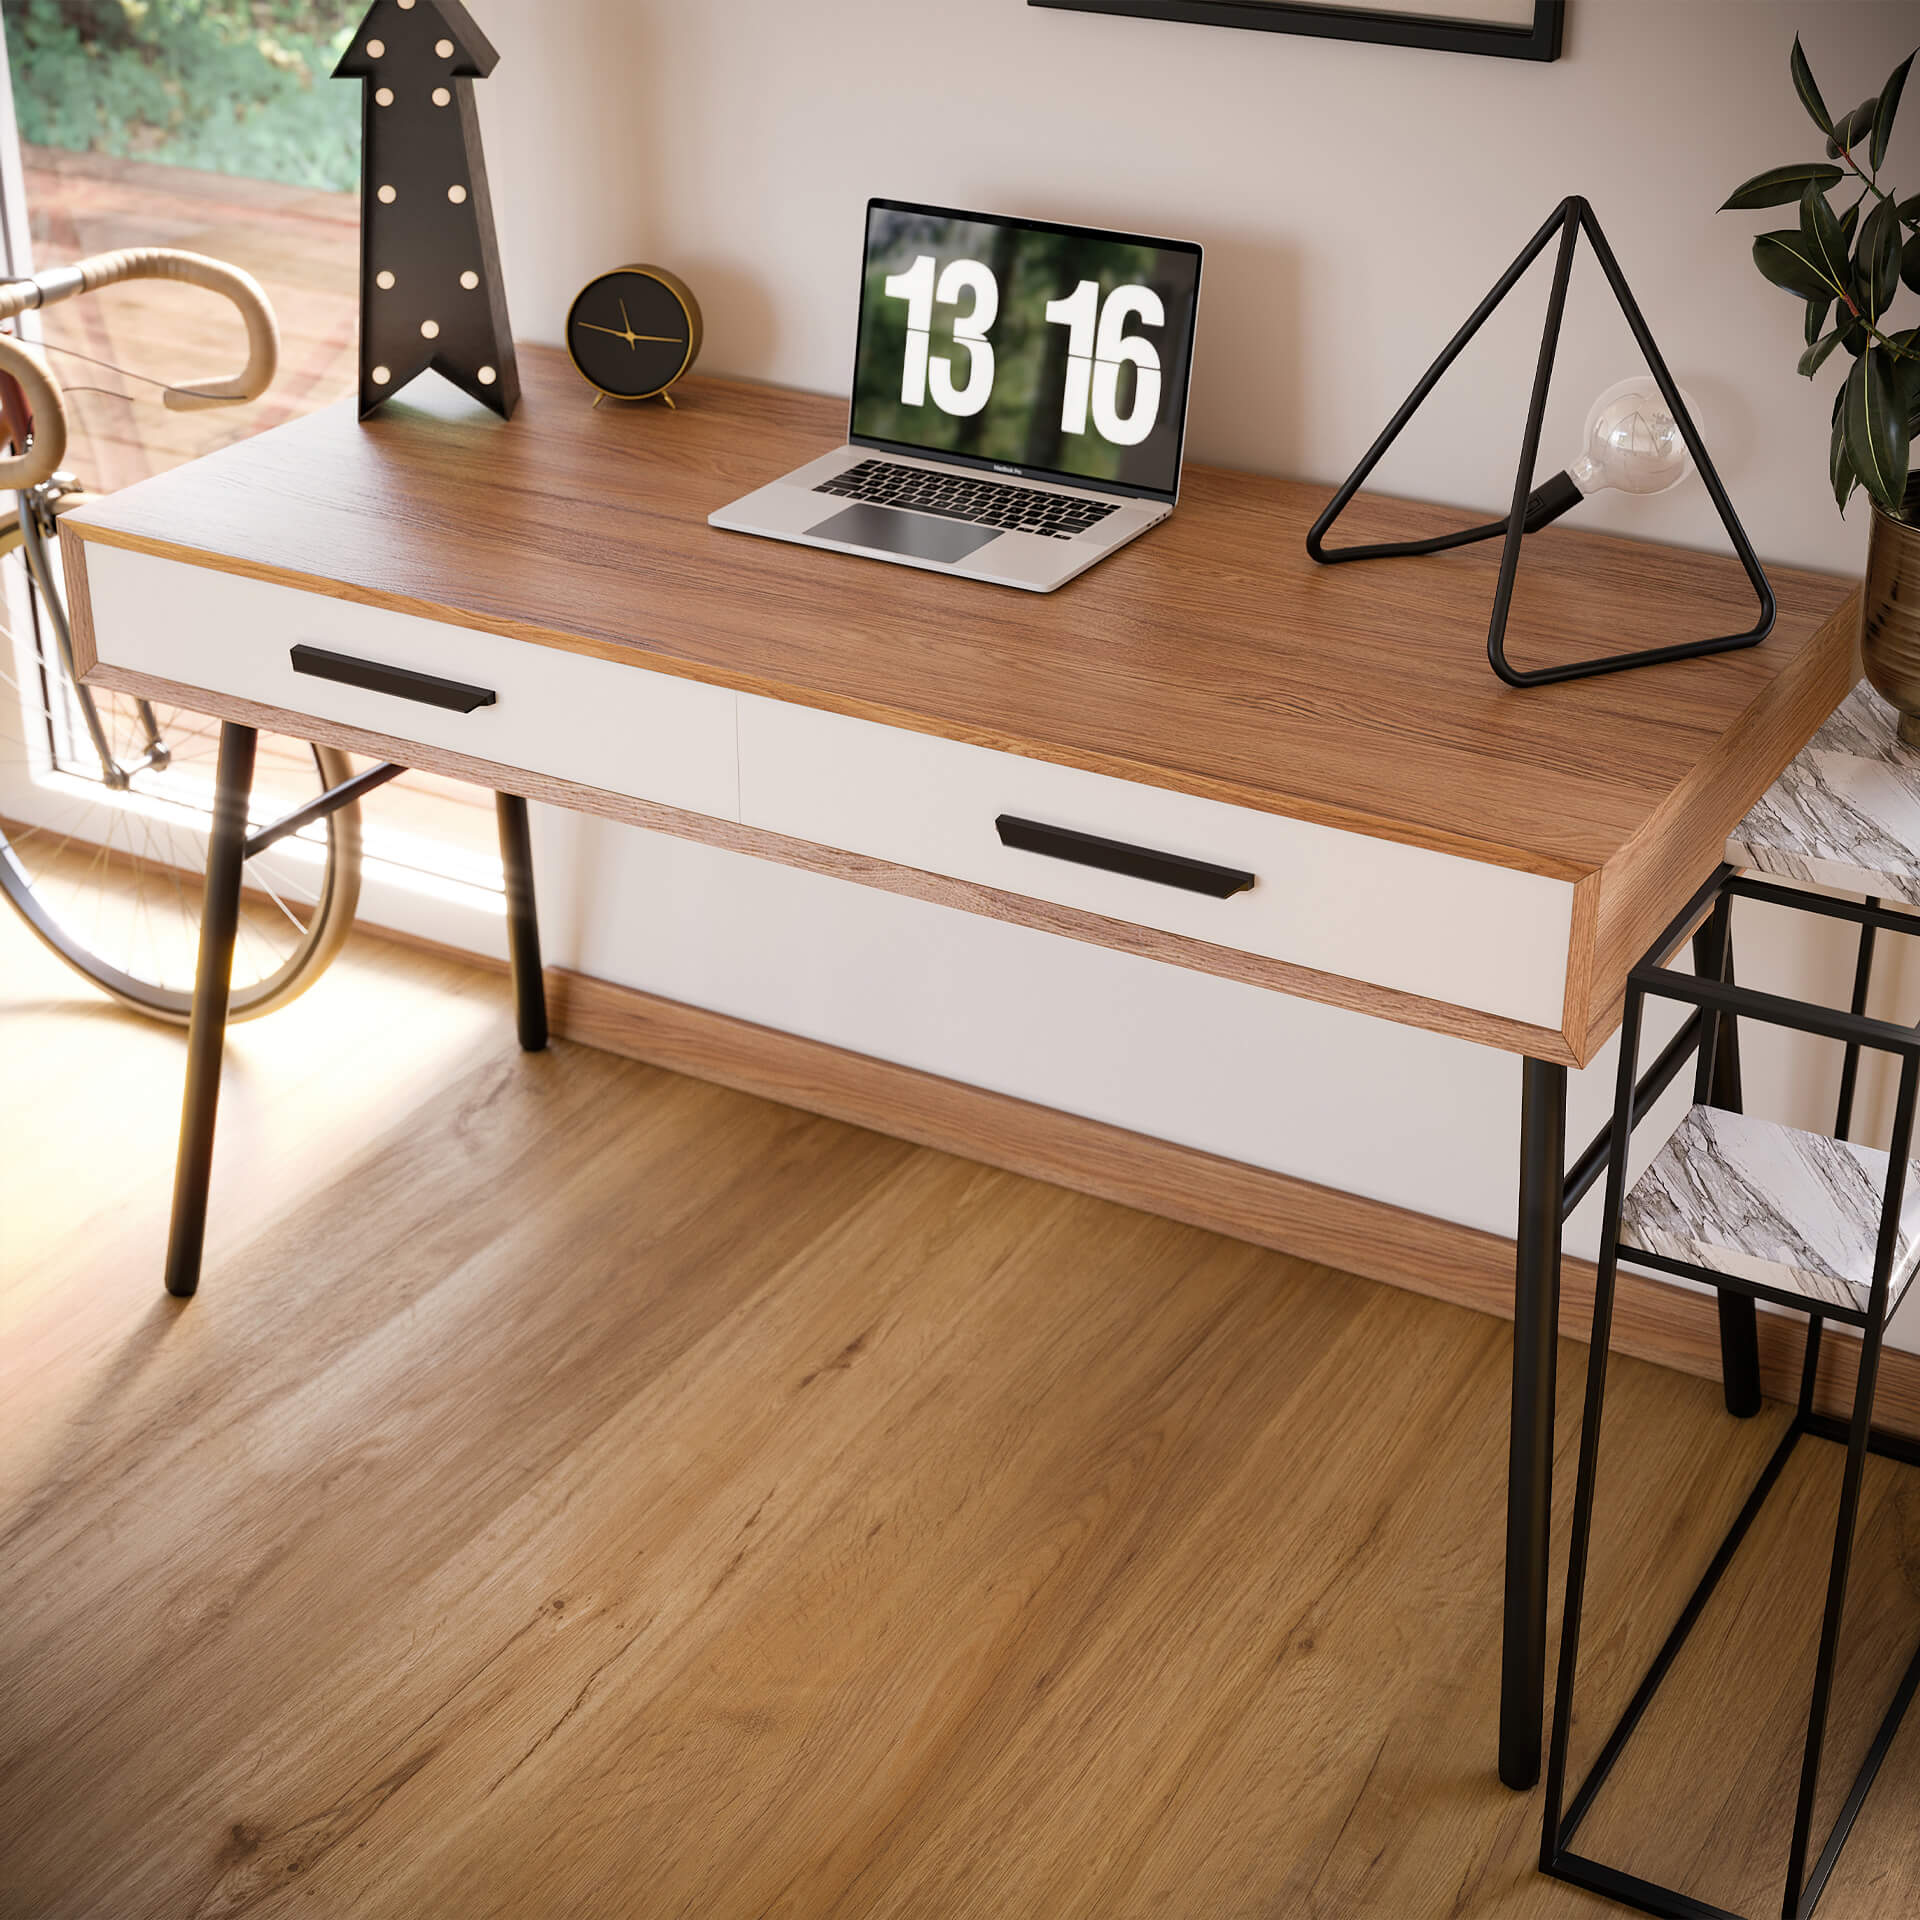 Wooden Desk Drawers Lifestyle Rendering